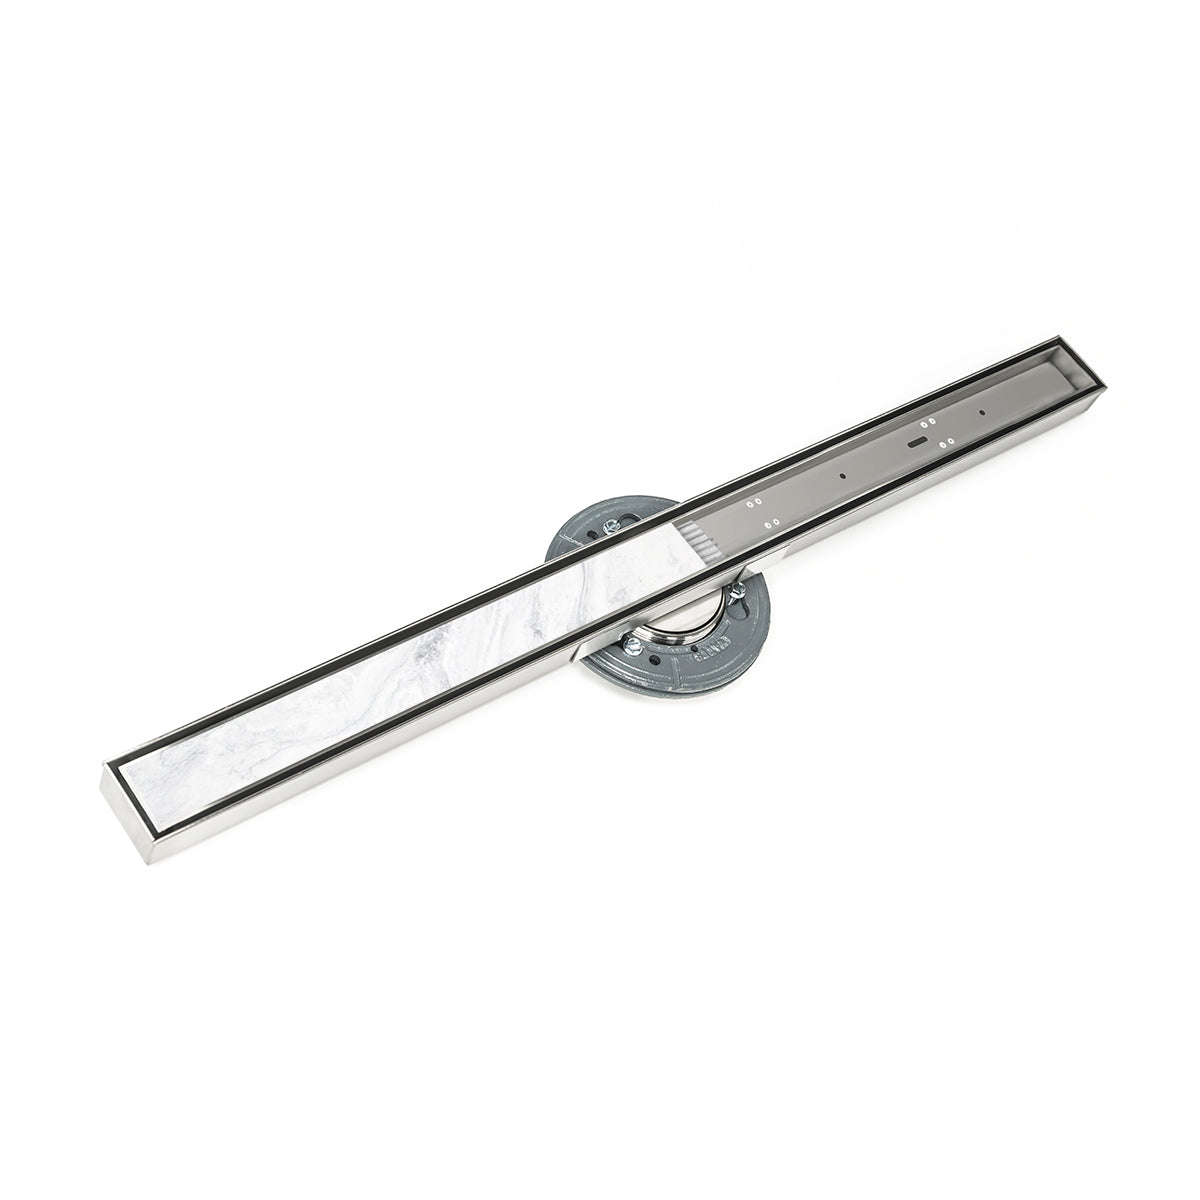 Infinity Drain 40" S-Stainless Steel Series High Flow Site Sizable Linear Drain Kit with Tile Insert Frame with ABS Drain Body, 3" Outlet